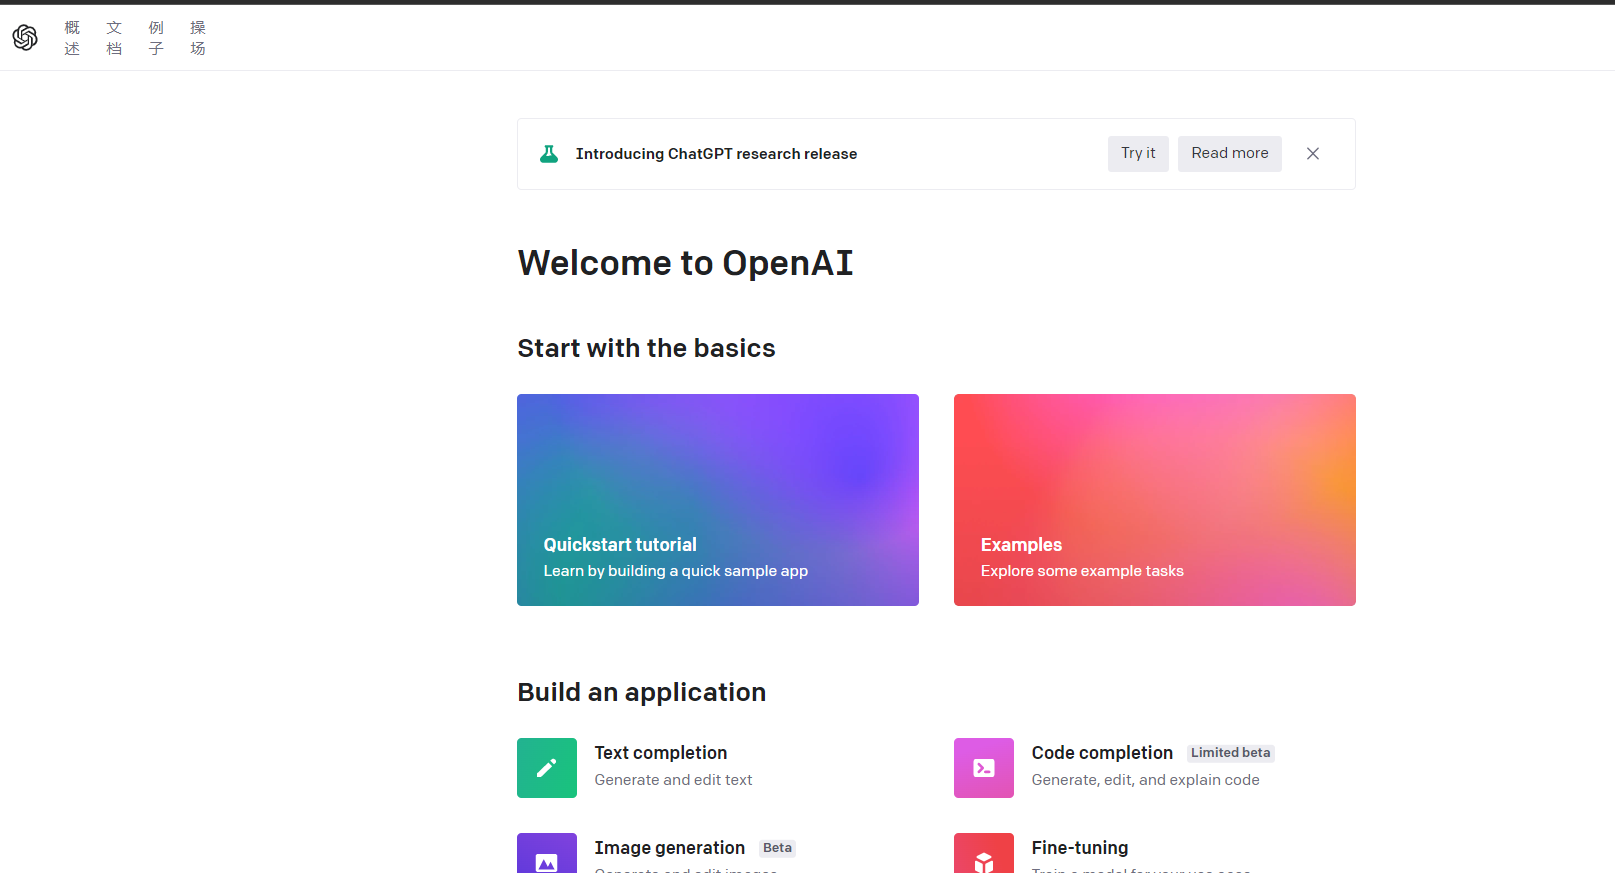 OpenAI‘s services are not available in your country 完美解决方案